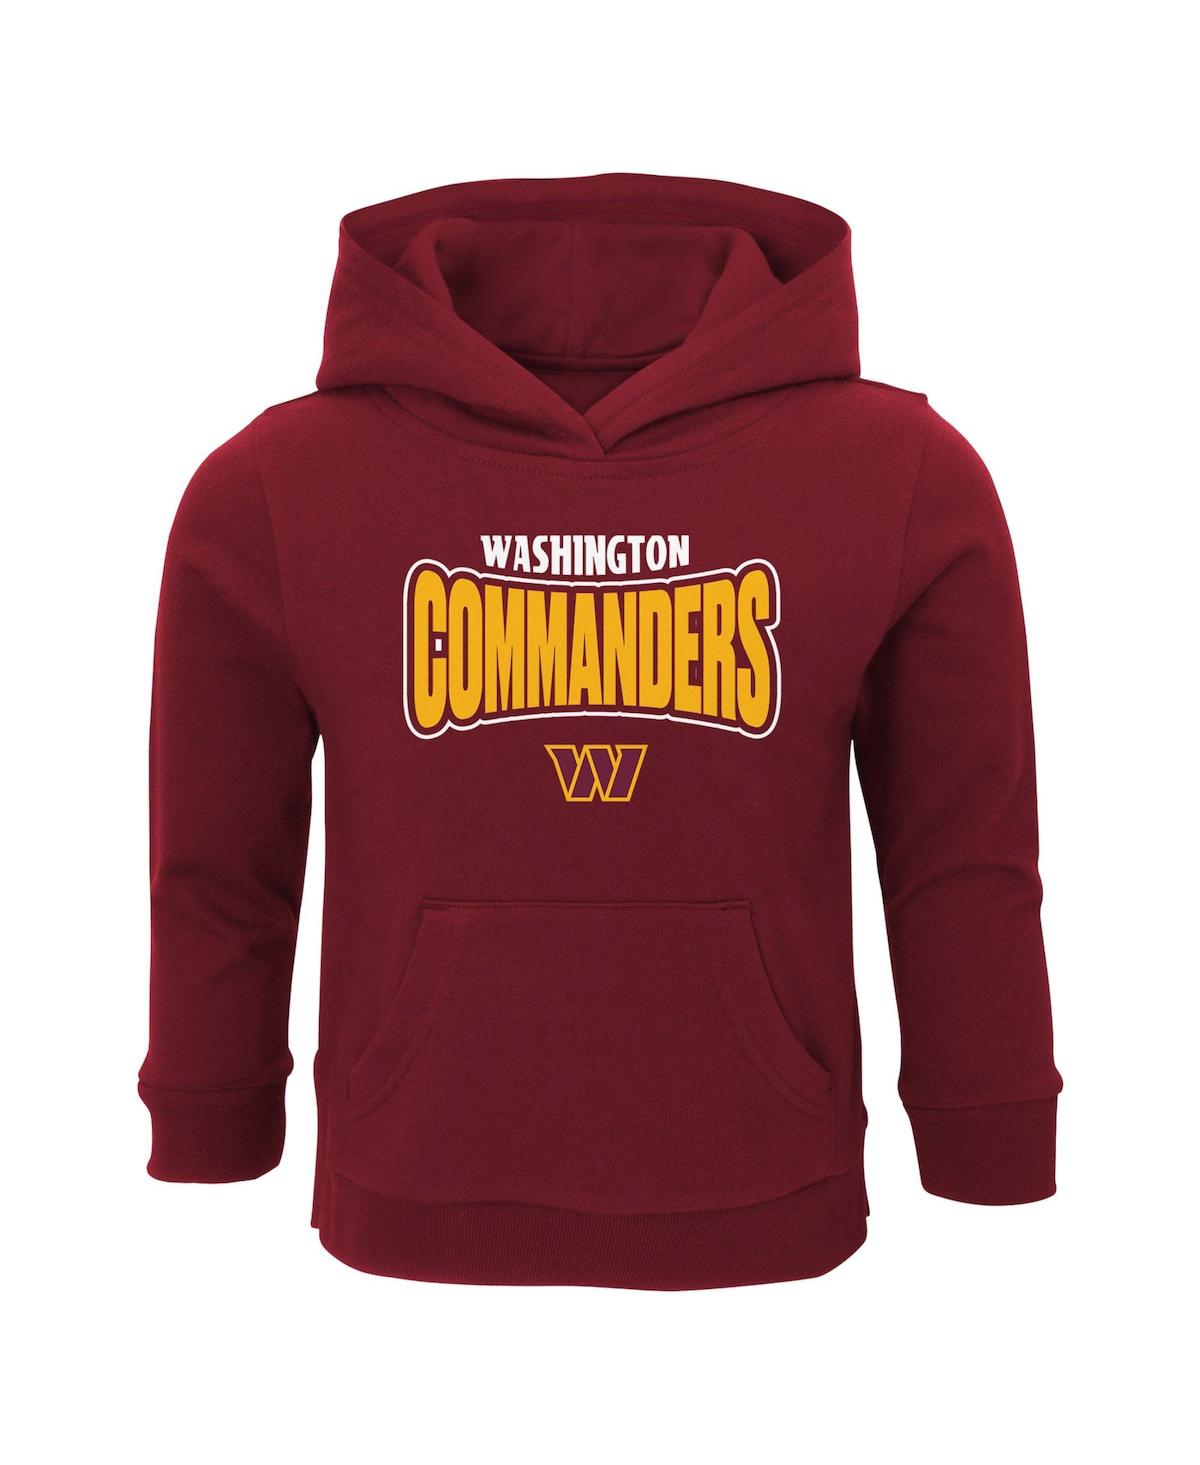 Outerstuff Babies' Toddler Boys And Girls Burgundy Washington Commanders Draft Pick Pullover Hoodie